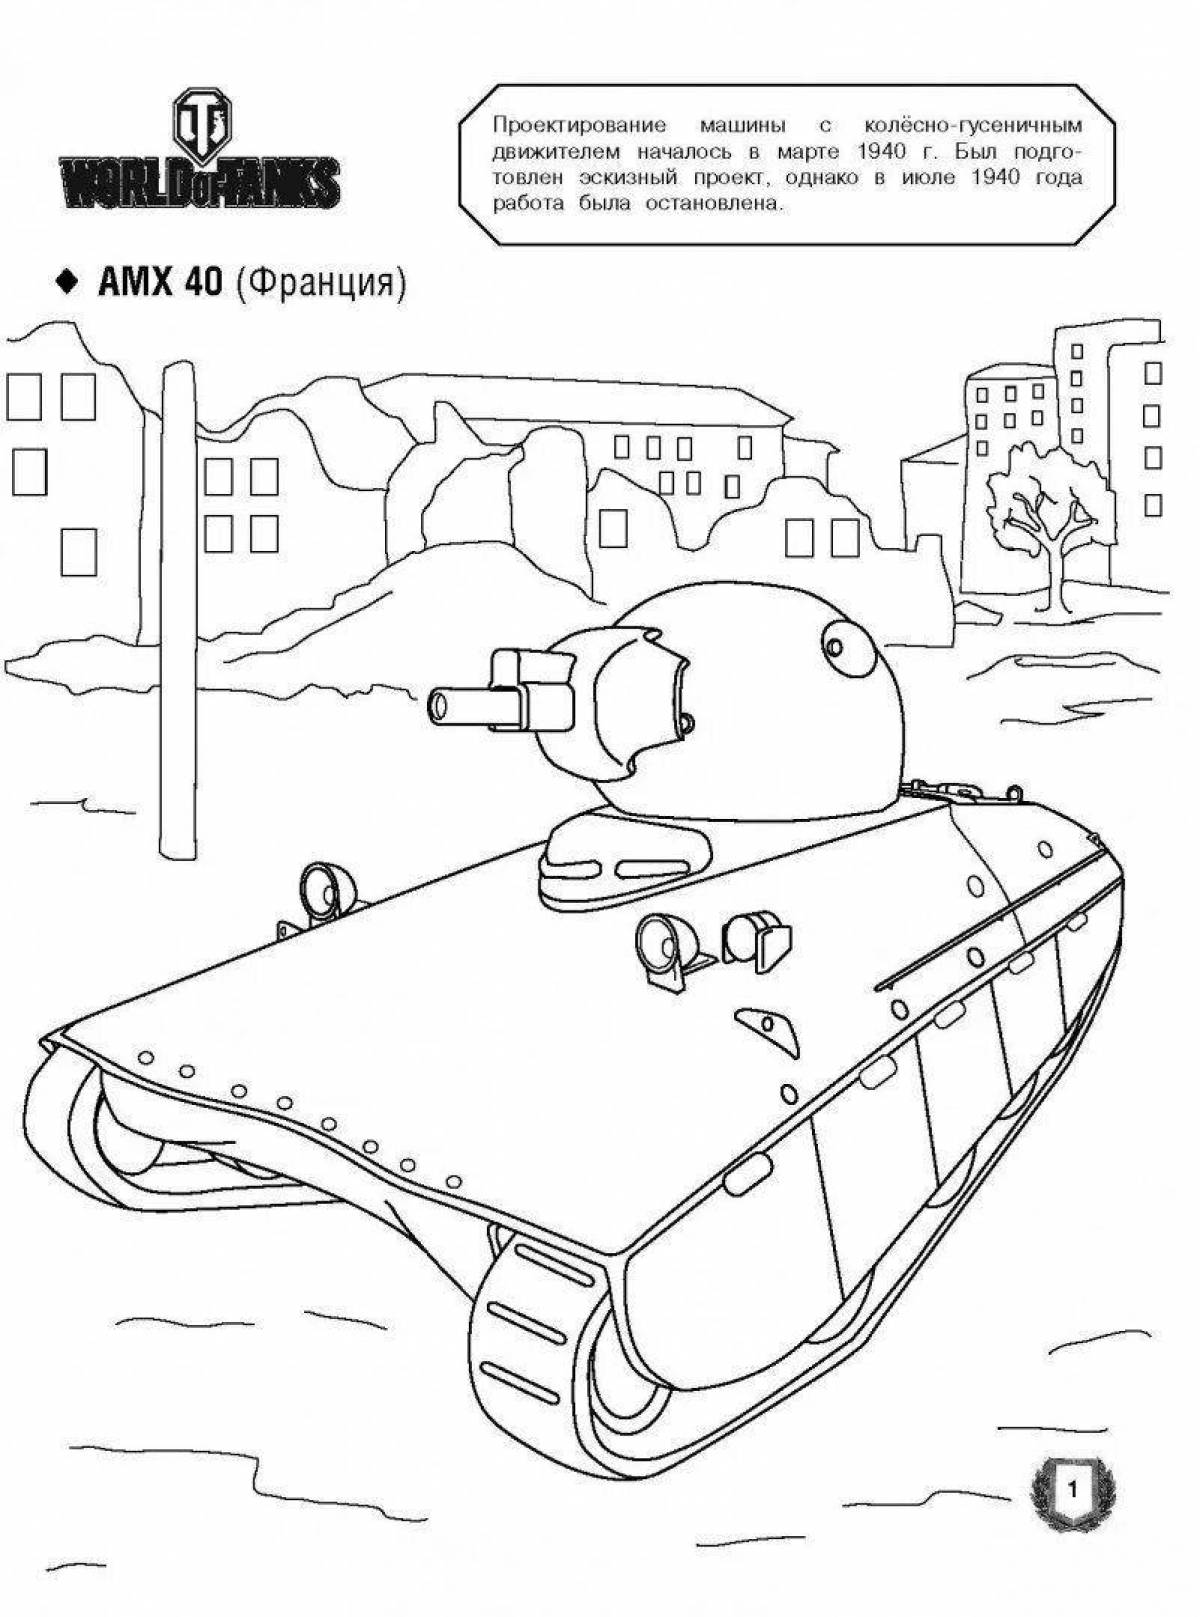 Amazing world of tanks coloring page